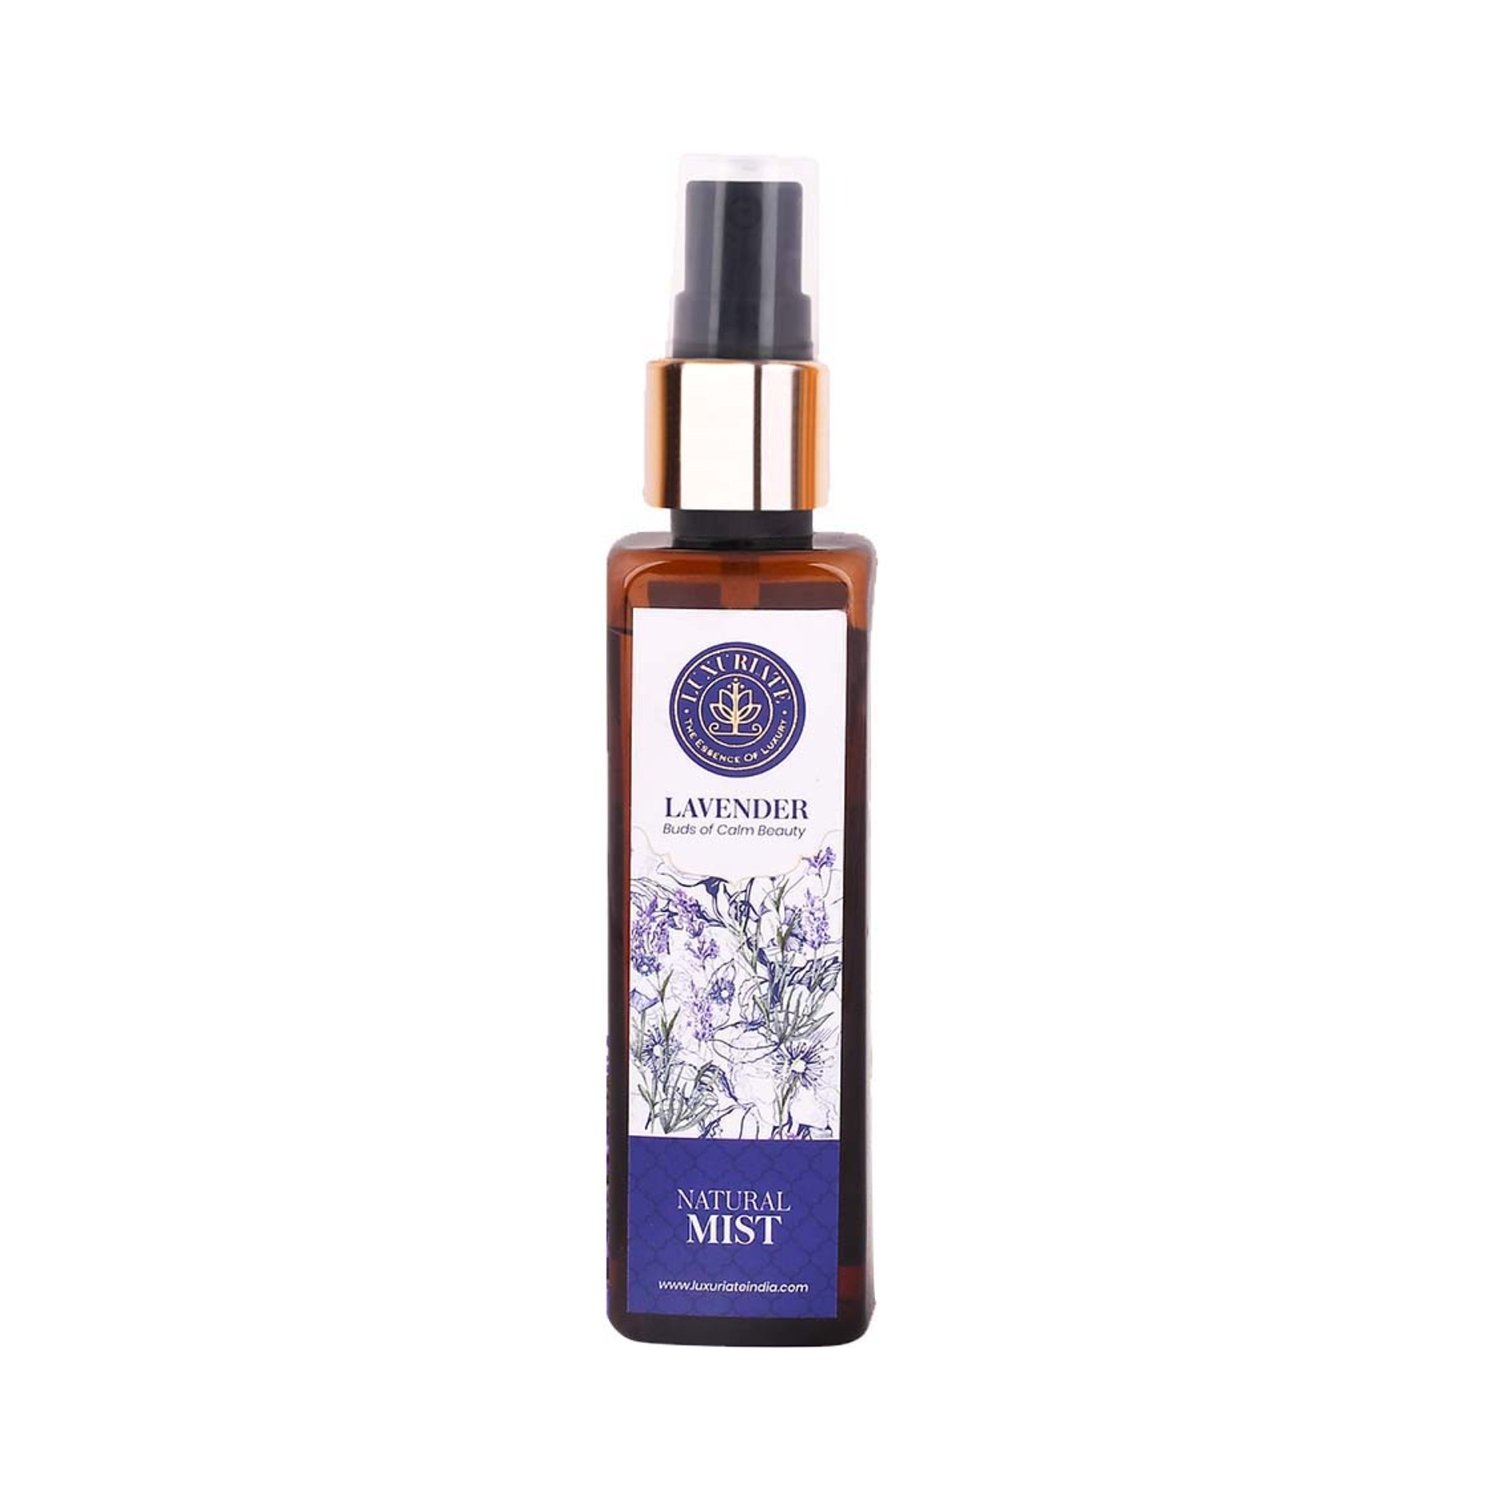 LUXURIATE | LUXURIATE Pure and Natural Body & Face Lavender Mist Spray (100ml)